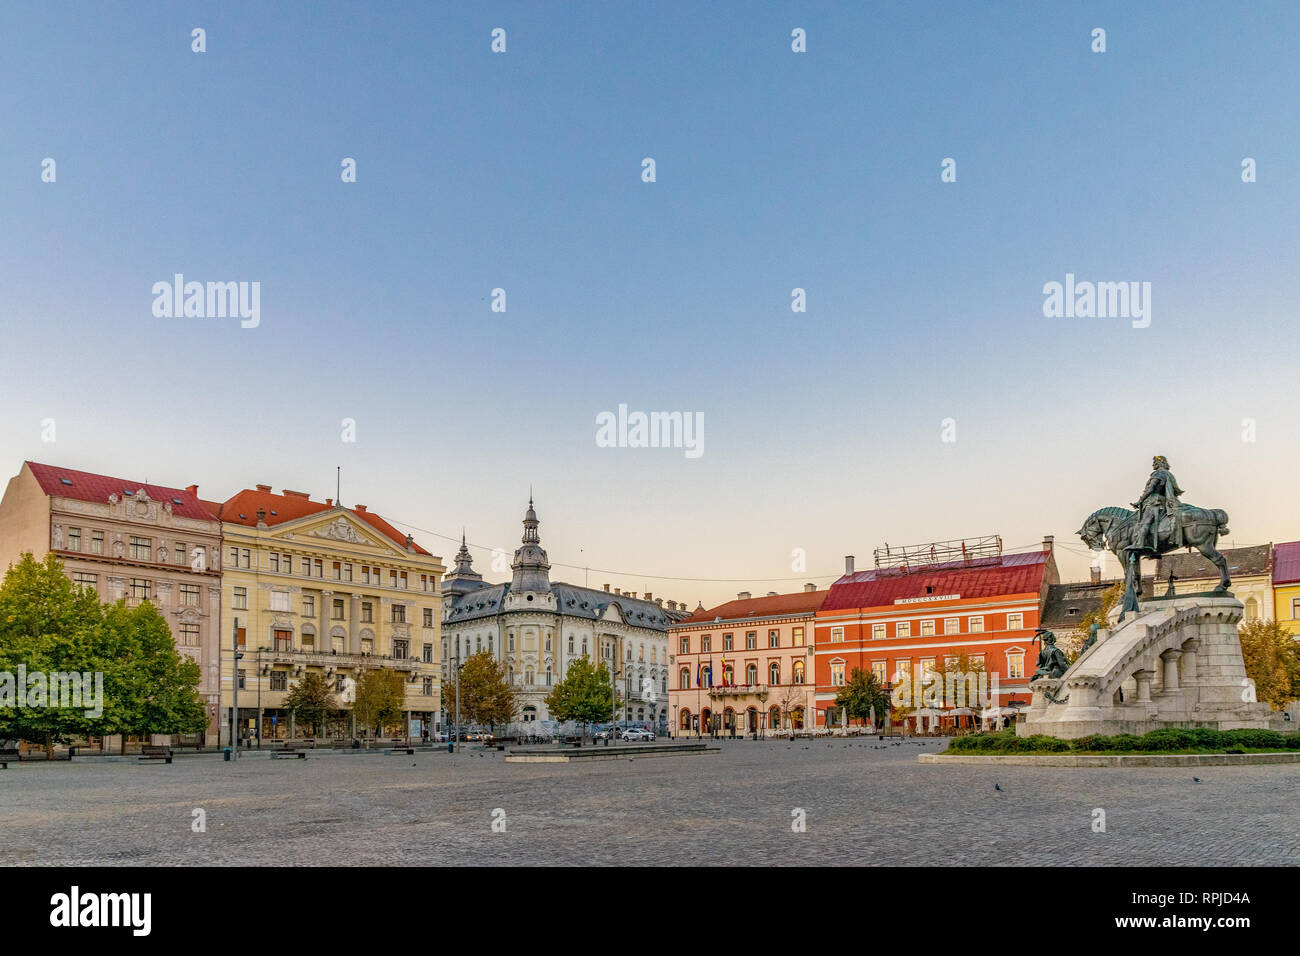 Cluj-Napoca city center. View from the Unirii Square to the Josika Palace, Rhedey Palace and New York Hotel at sunrise on a beautiful, clear sky day Stock Photo